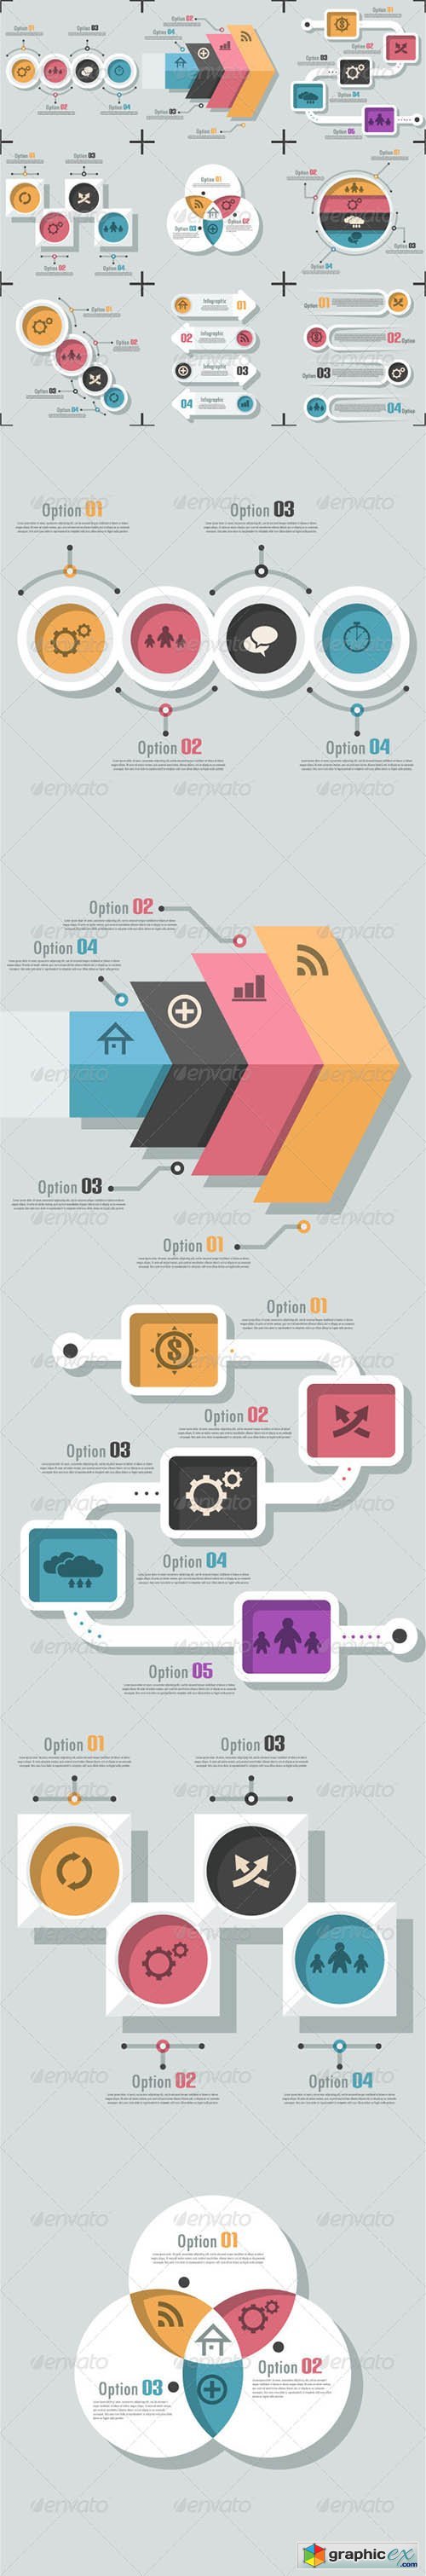 Graphicriver Set Of 9 Flat Infographic Options Templates 6980489